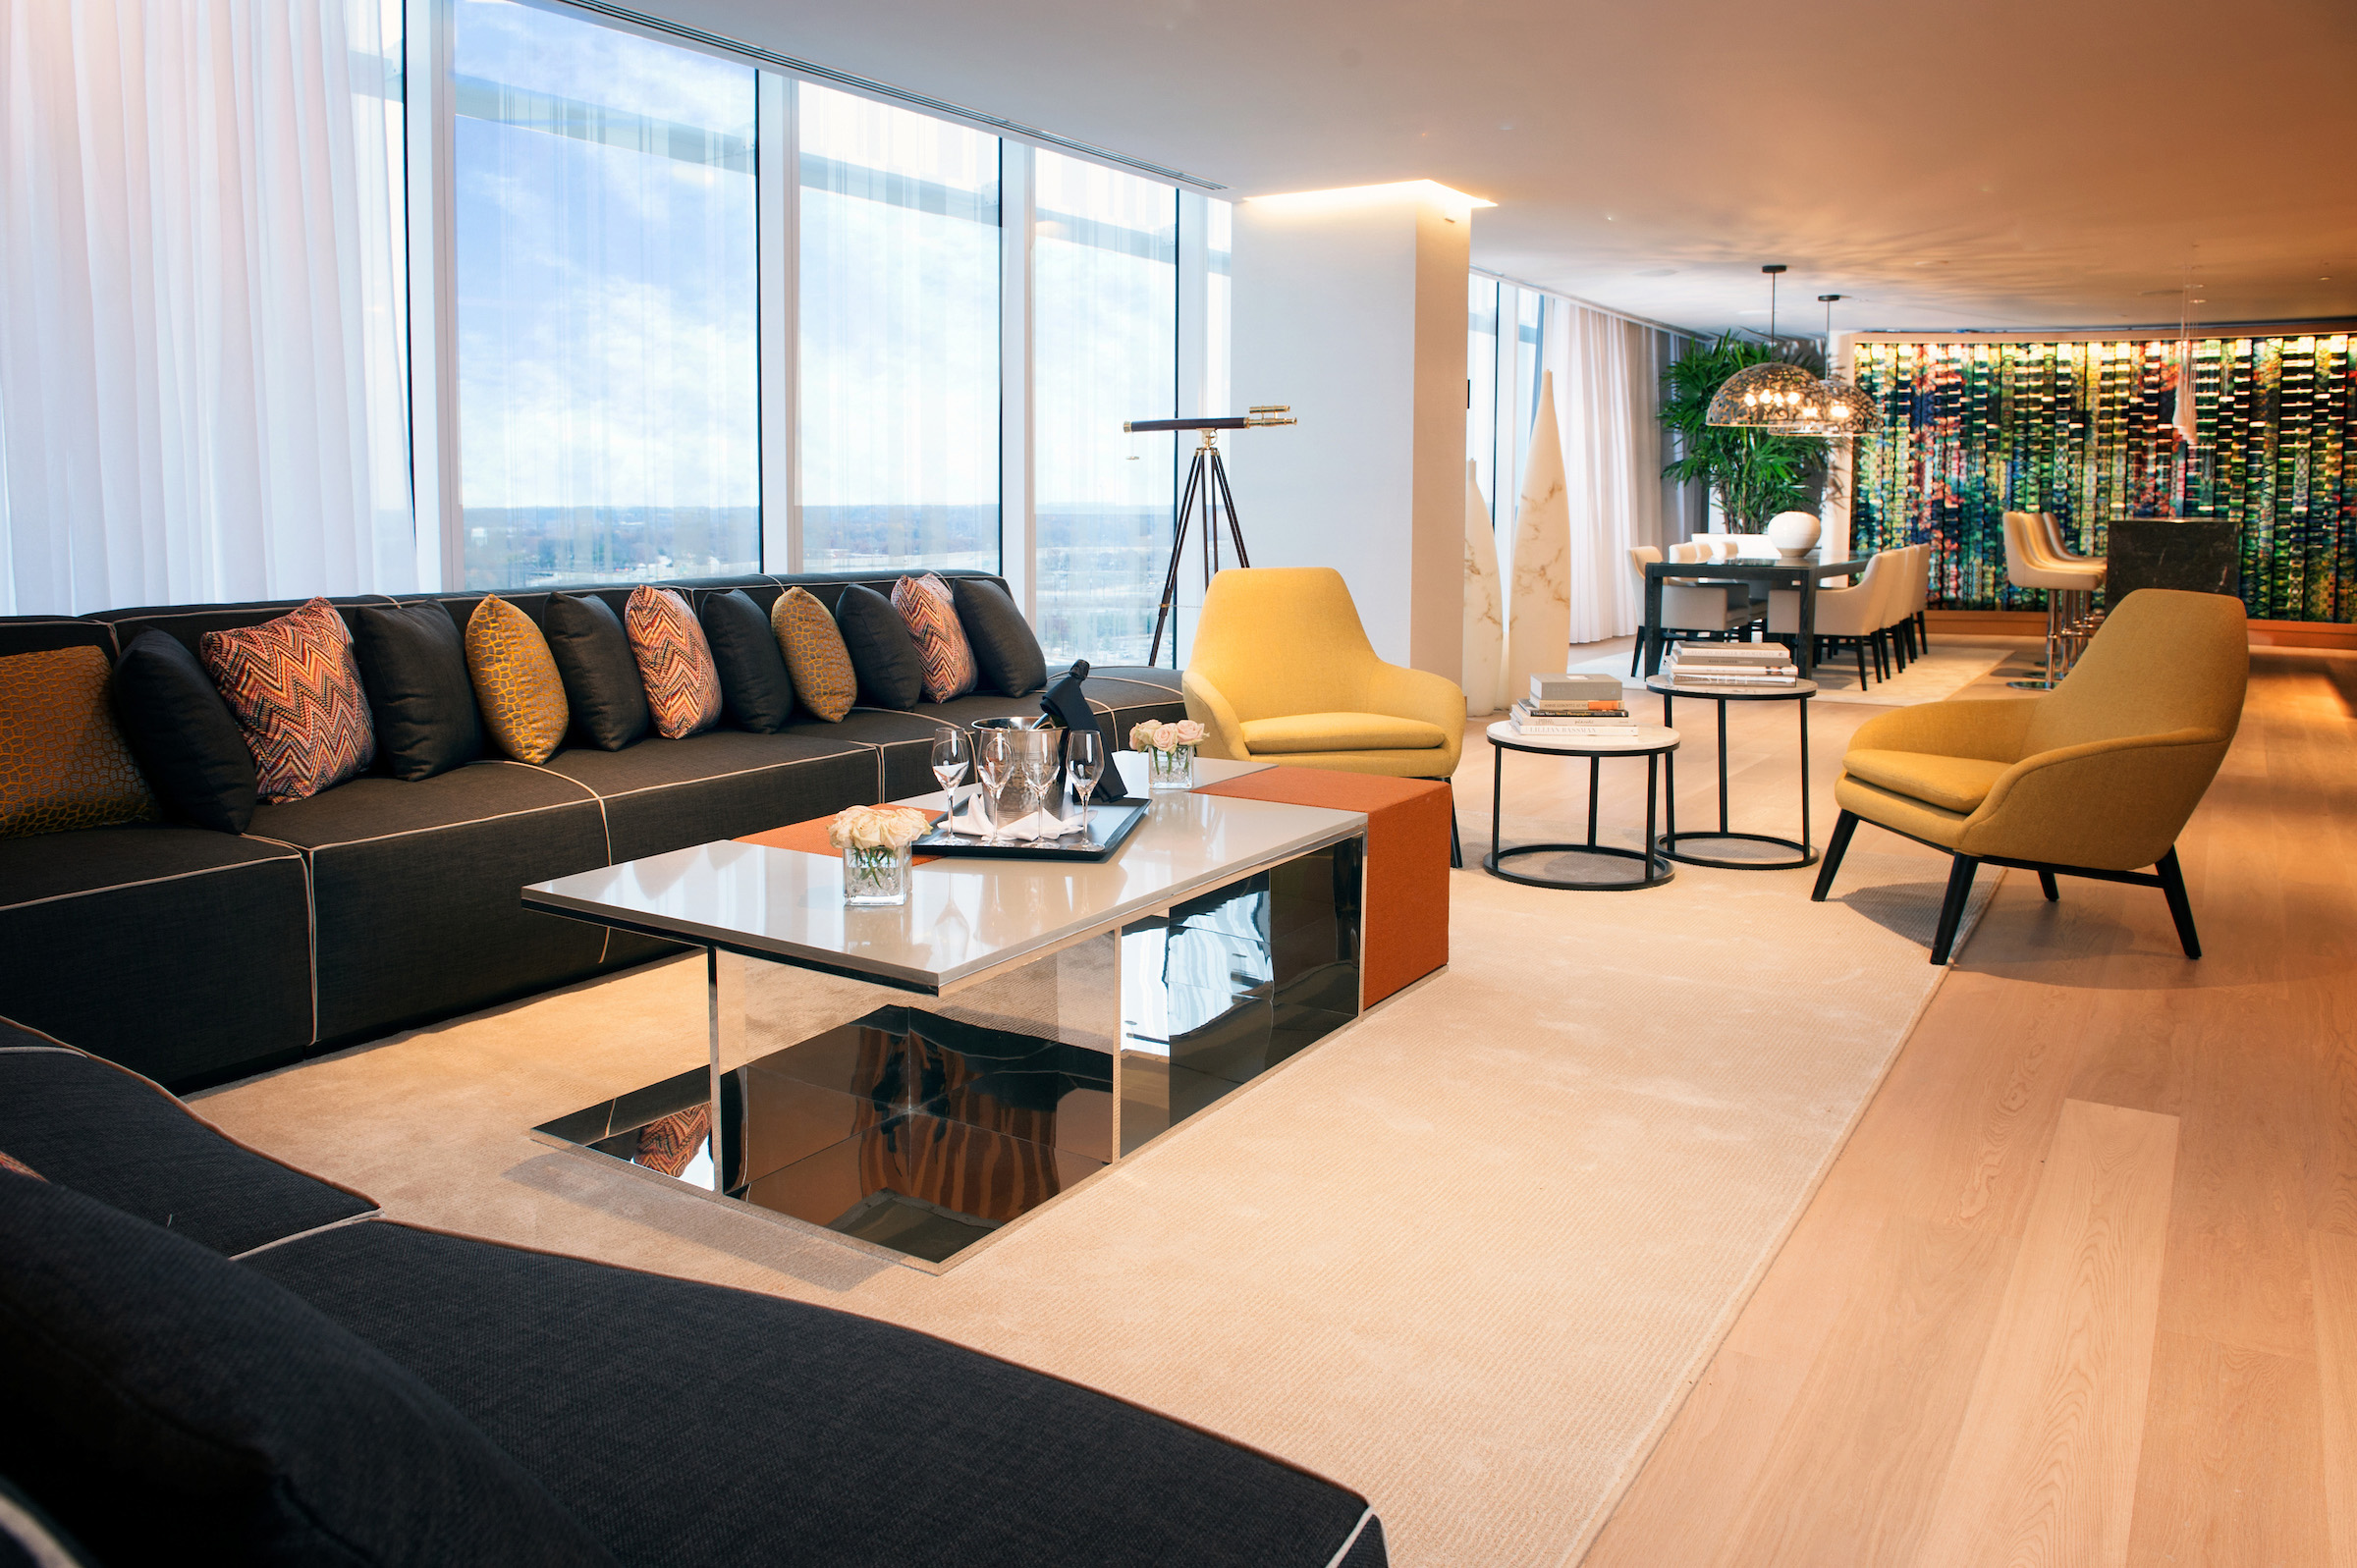 MGM National Harbor’s 3,200-square-foot Chairman Suite features two bedrooms, a secluded library, an eight-person dining room, standalone oval tubs and unrivaled views of Washington, D.C.’s iconic monuments.